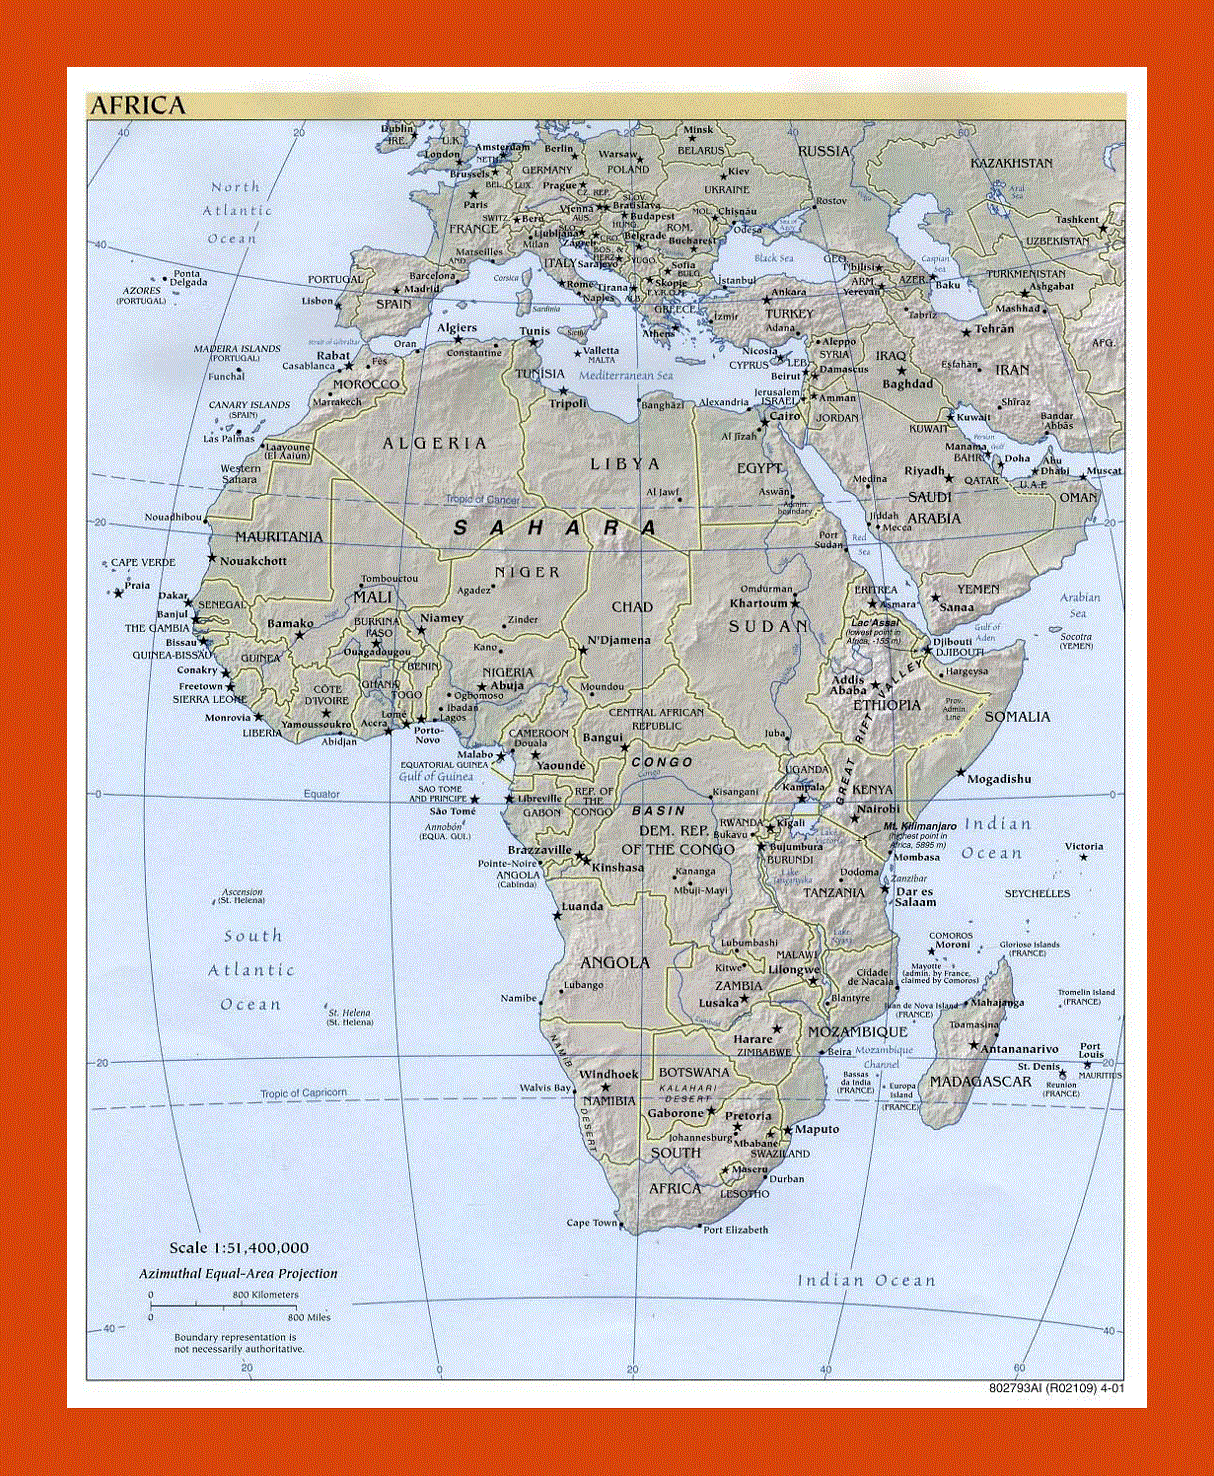 Political map of Africa - 2001